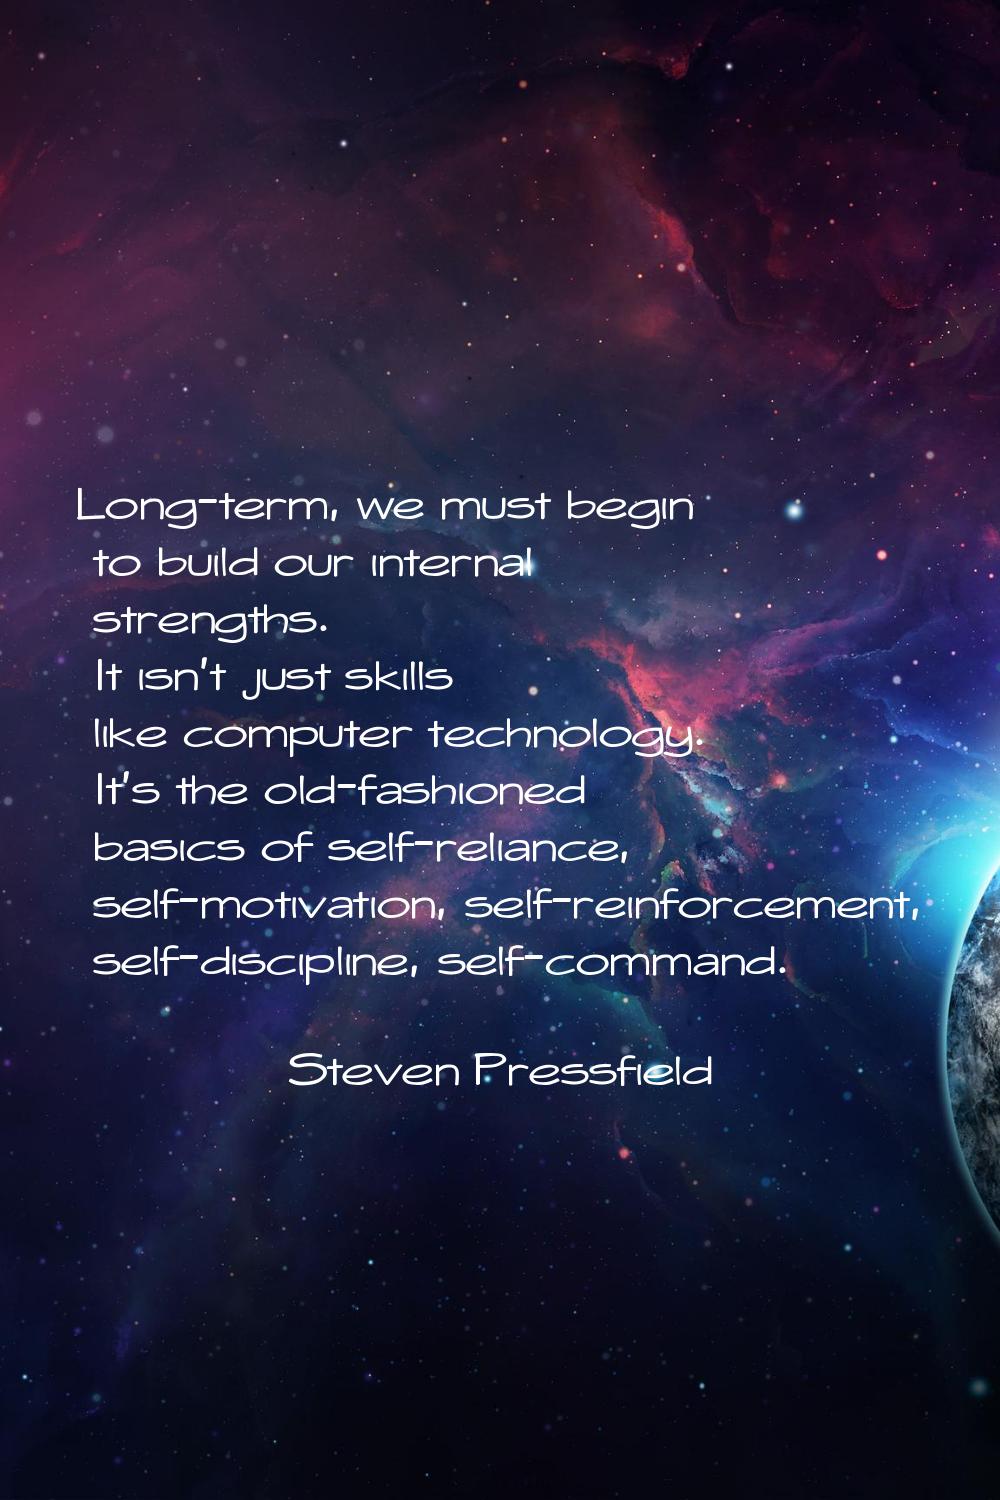 Long-term, we must begin to build our internal strengths. It isn't just skills like computer techno